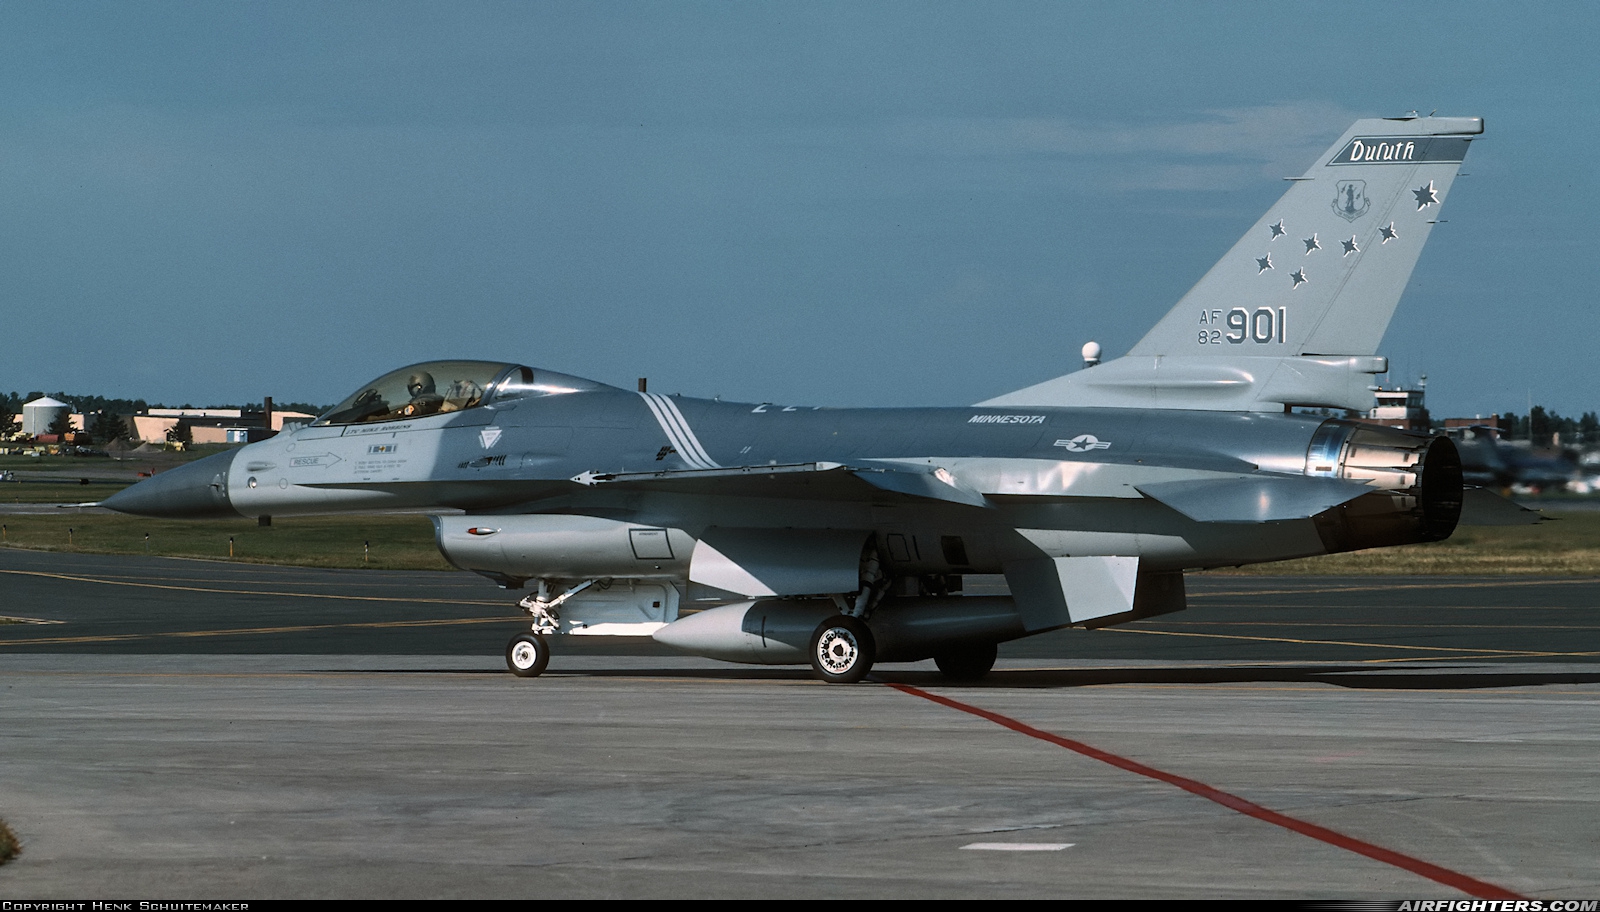 USA - Air Force General Dynamics F-16A/ADF Fighting Falcon 82-0901 at Duluth - Int. (DLH / KDLH), USA